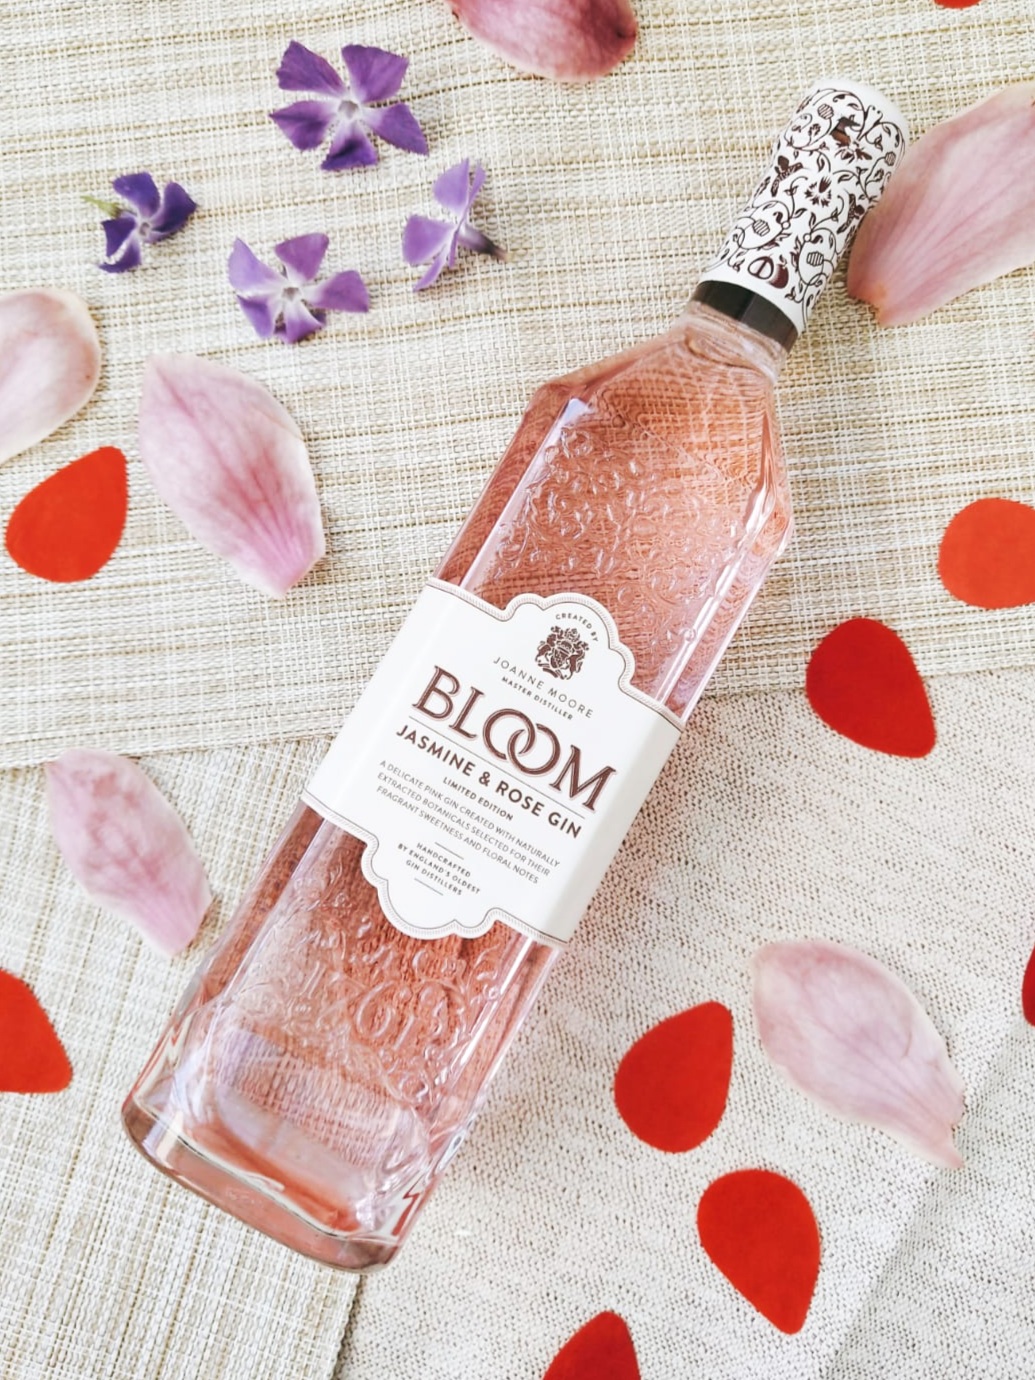 Bloom spirits gin review